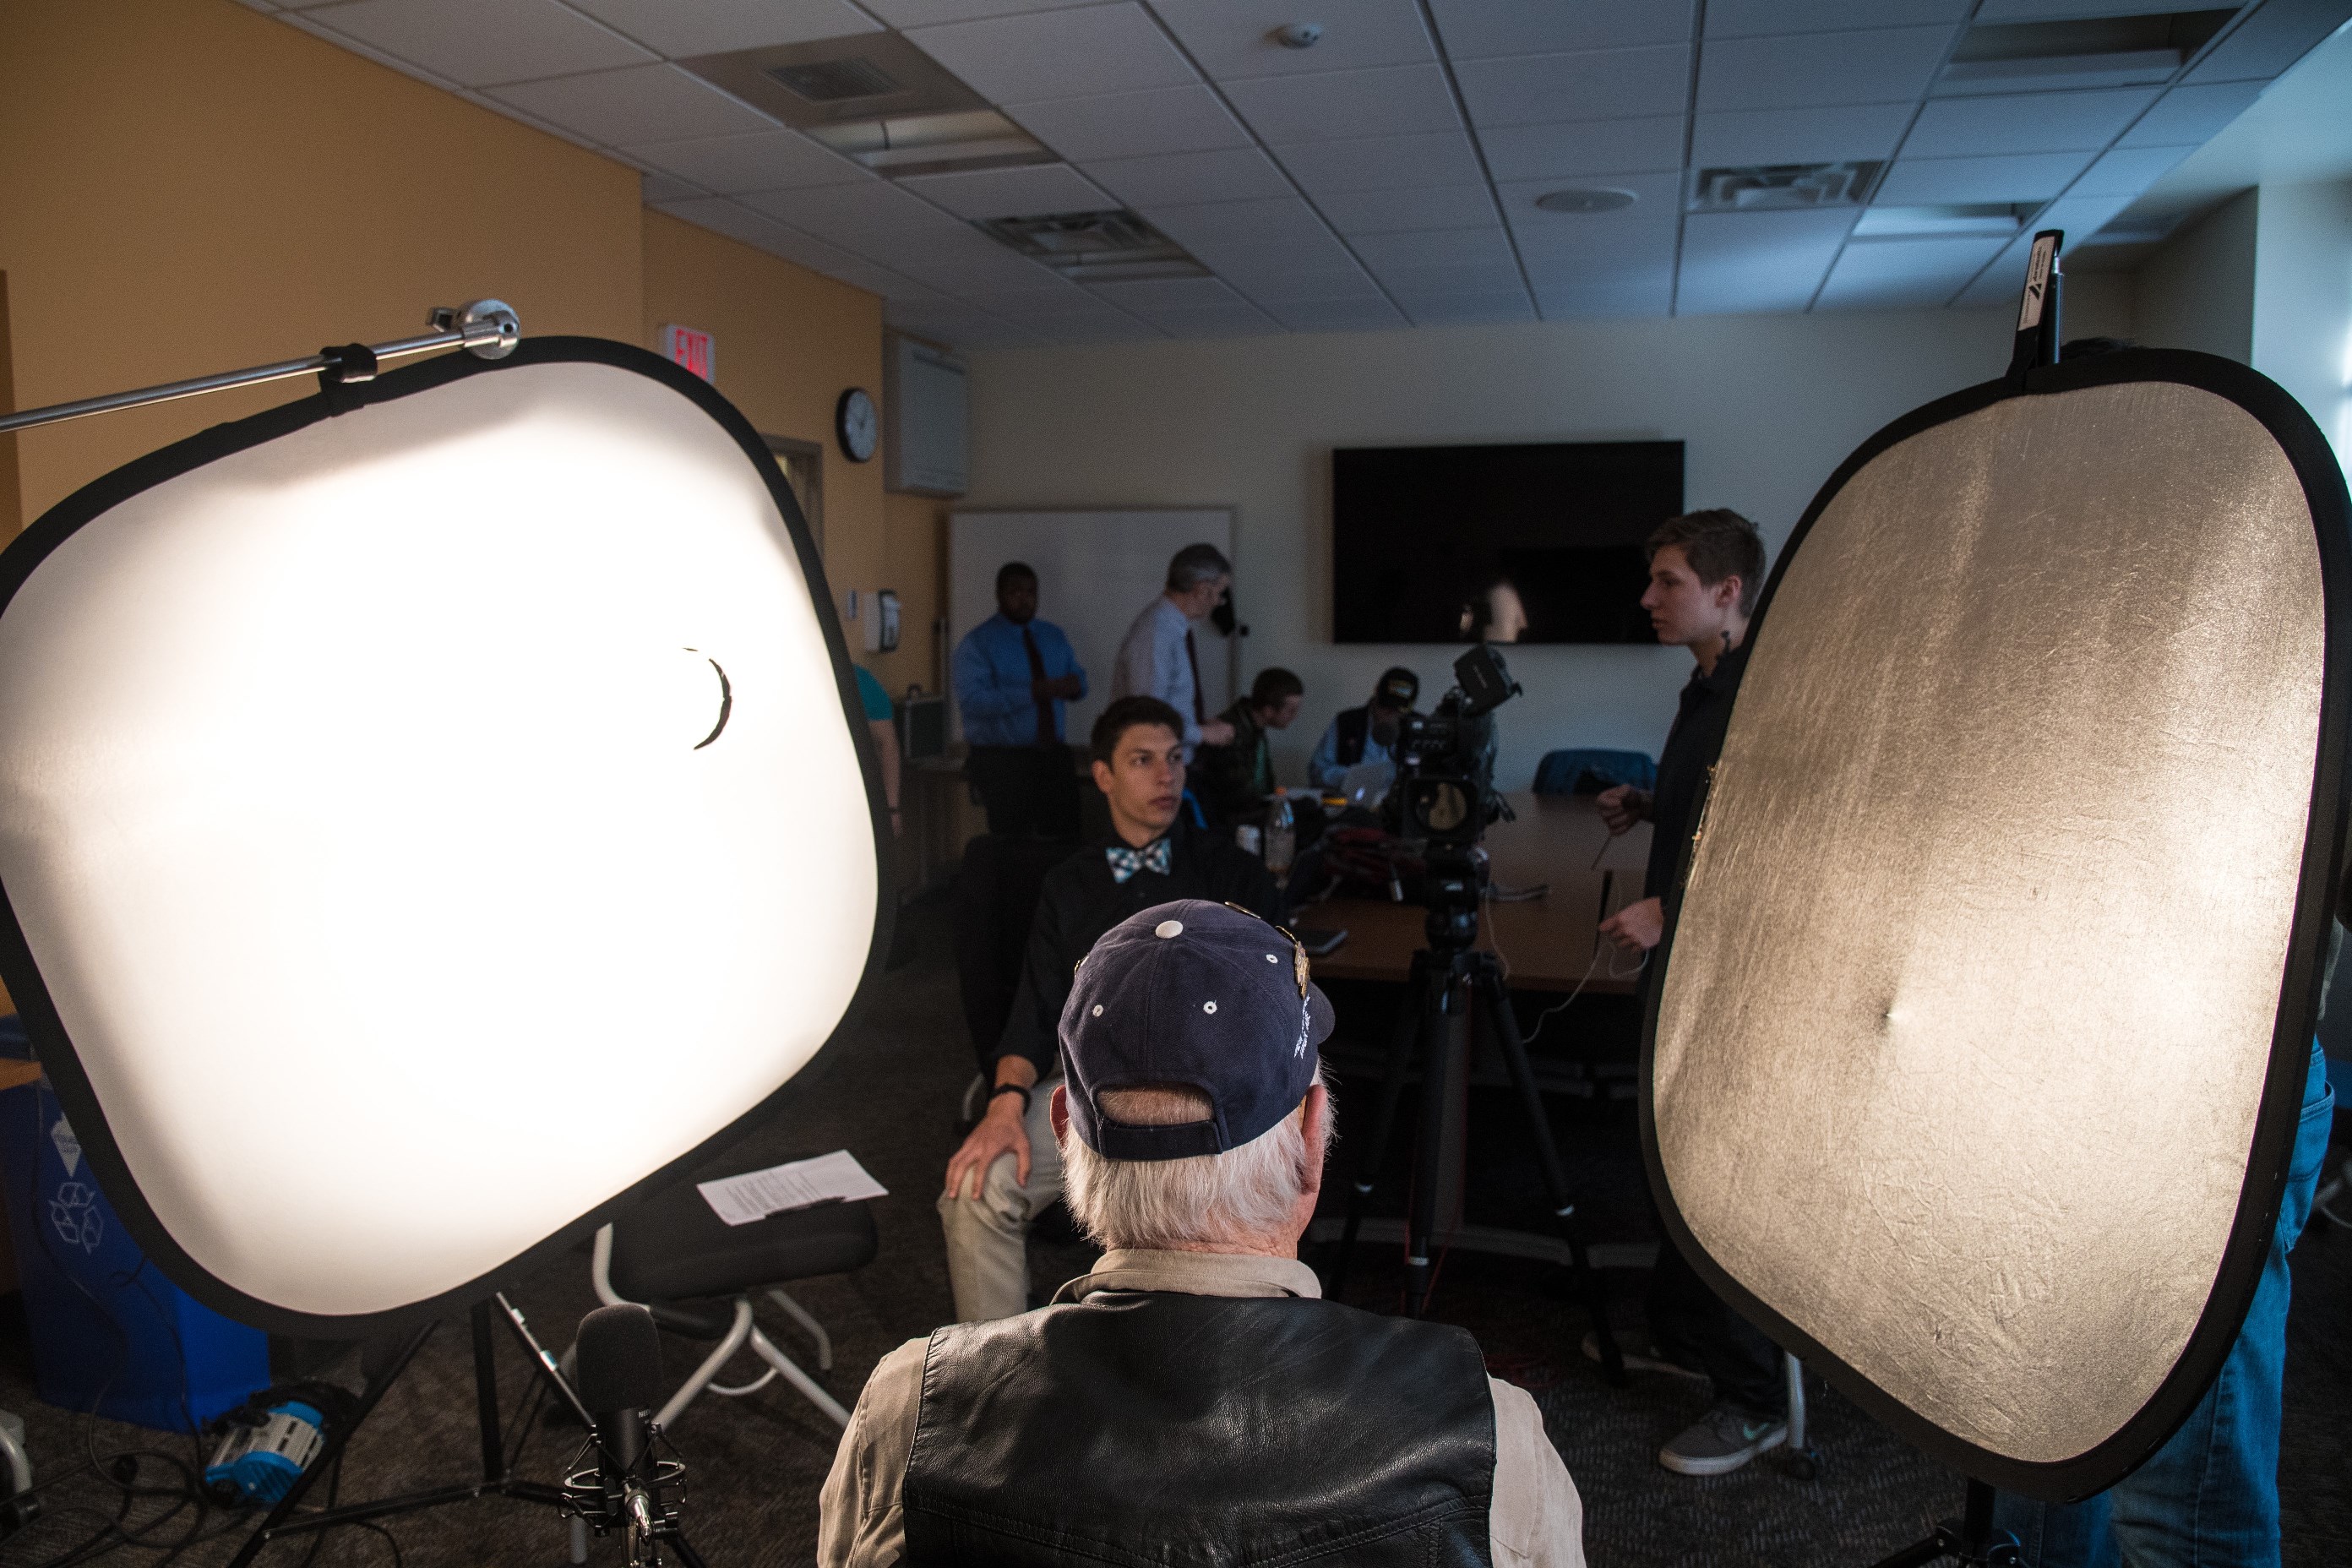 The veterans were interviewed at Husson University’s New England School of Communications. Over the past 2 years, the NESCom journalism program has submitted 8 interviews to the Library of Congress.